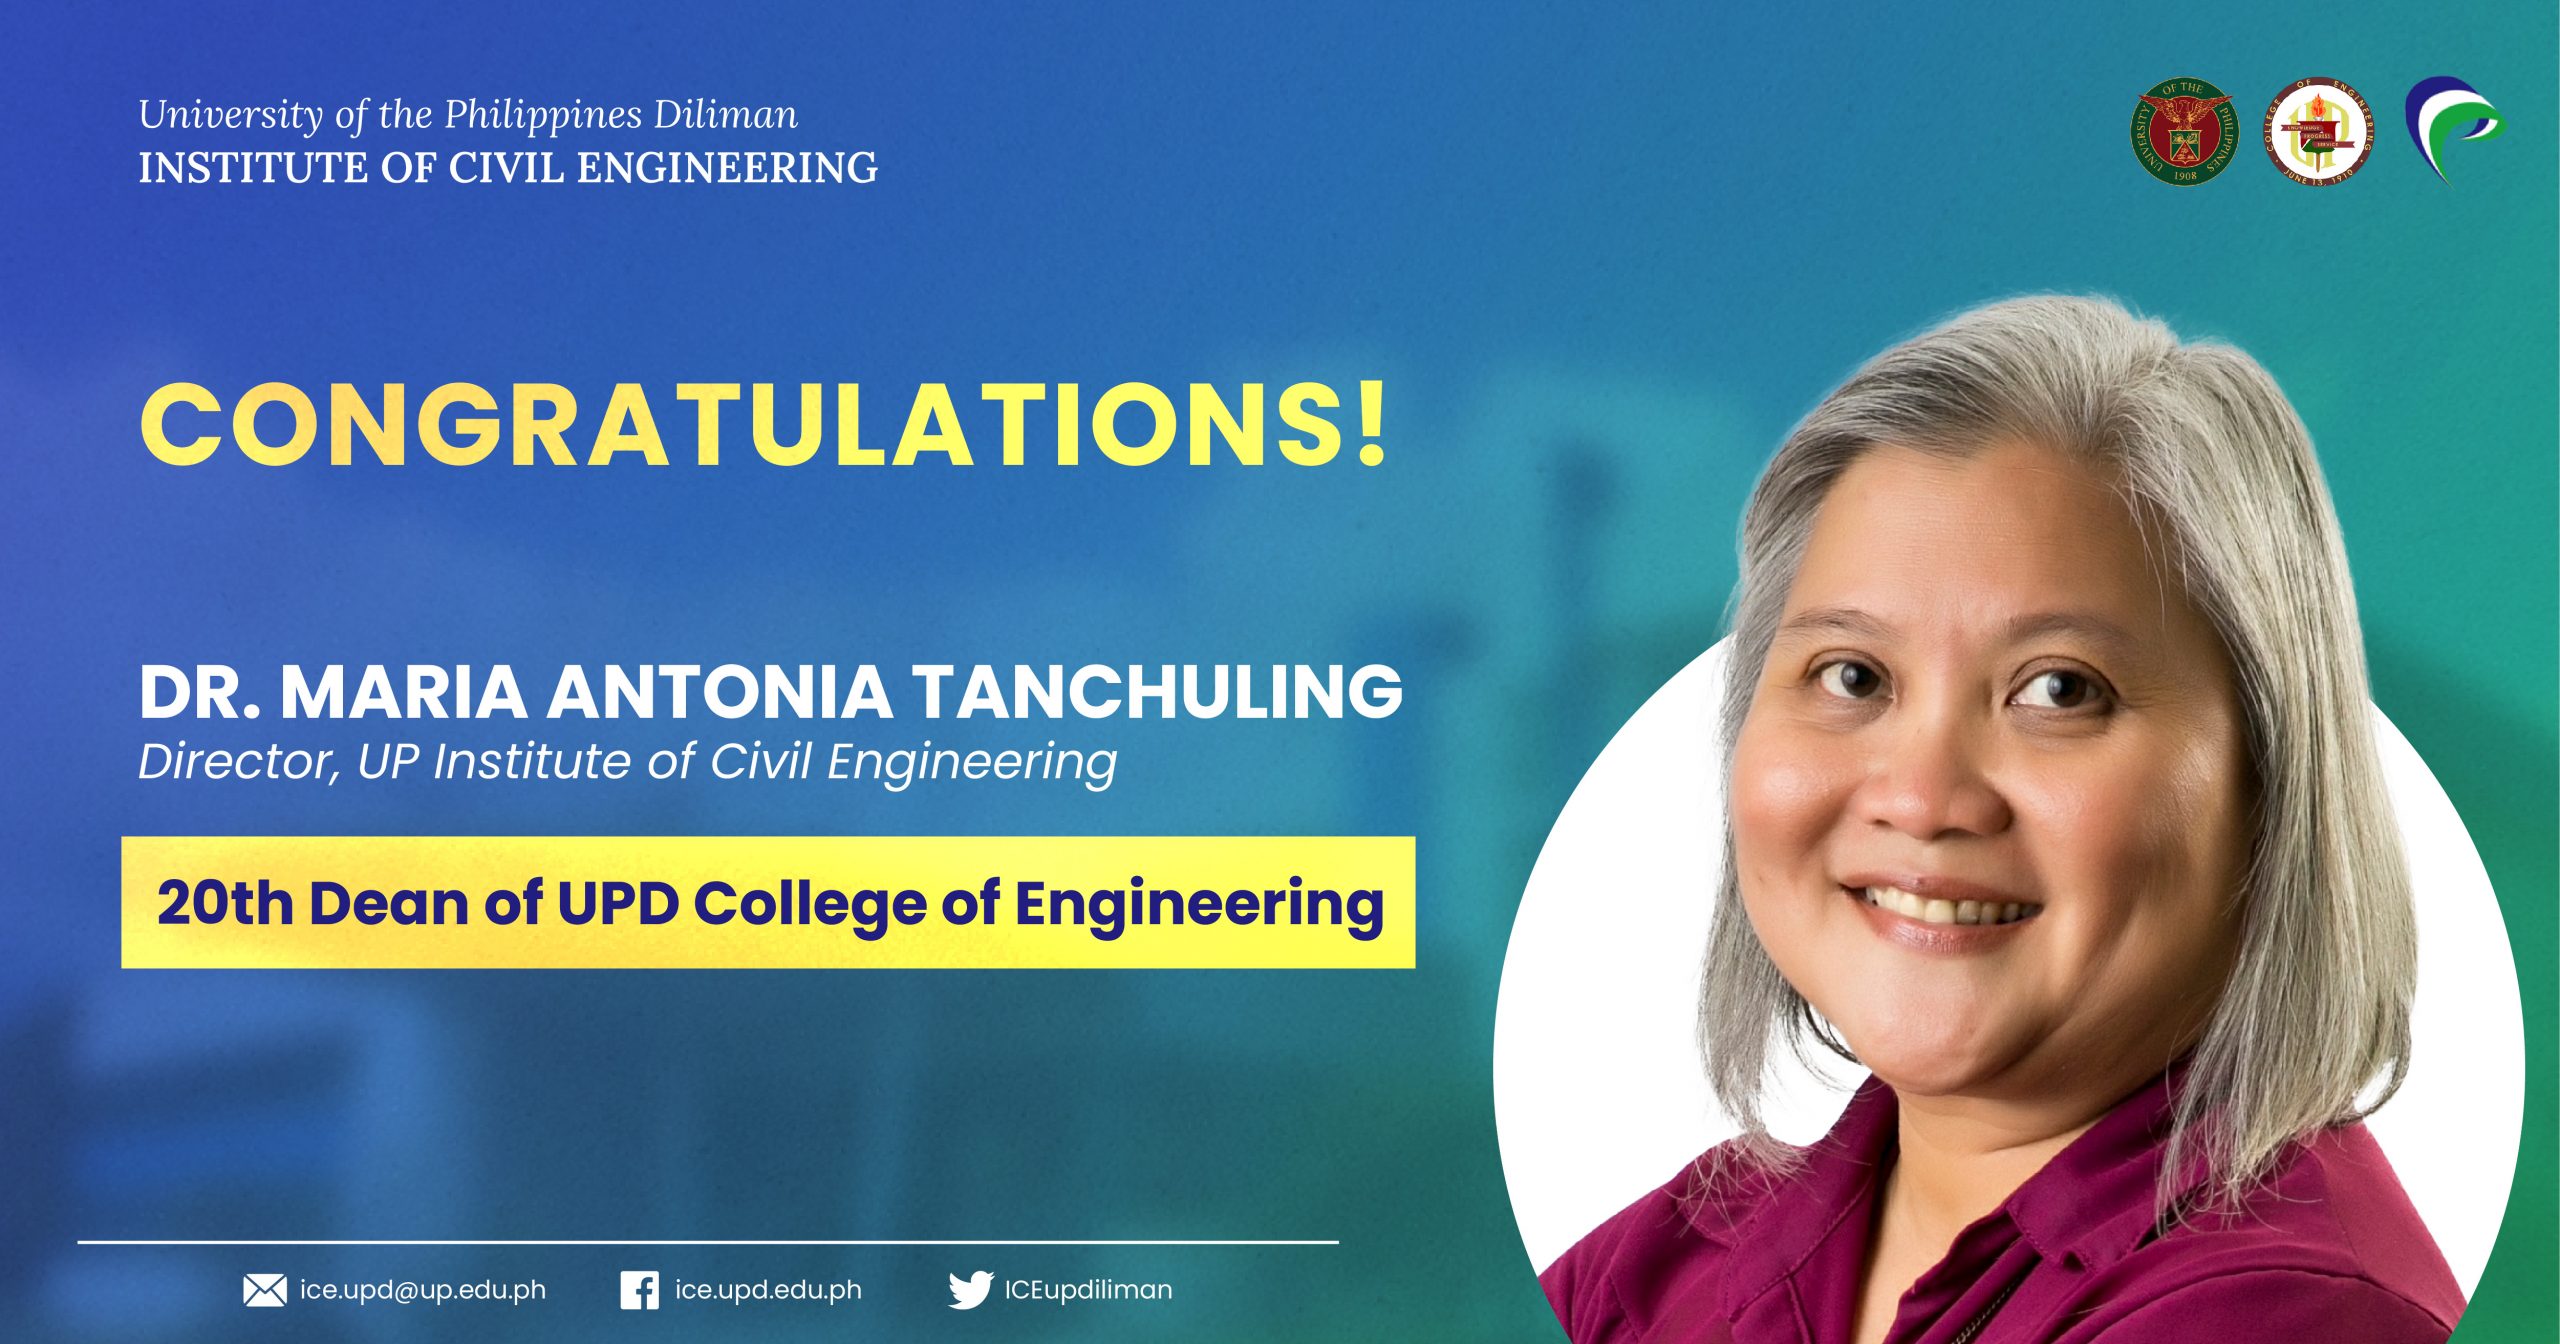 Dr. Tanchuling is the 20th Dean of UPD COE